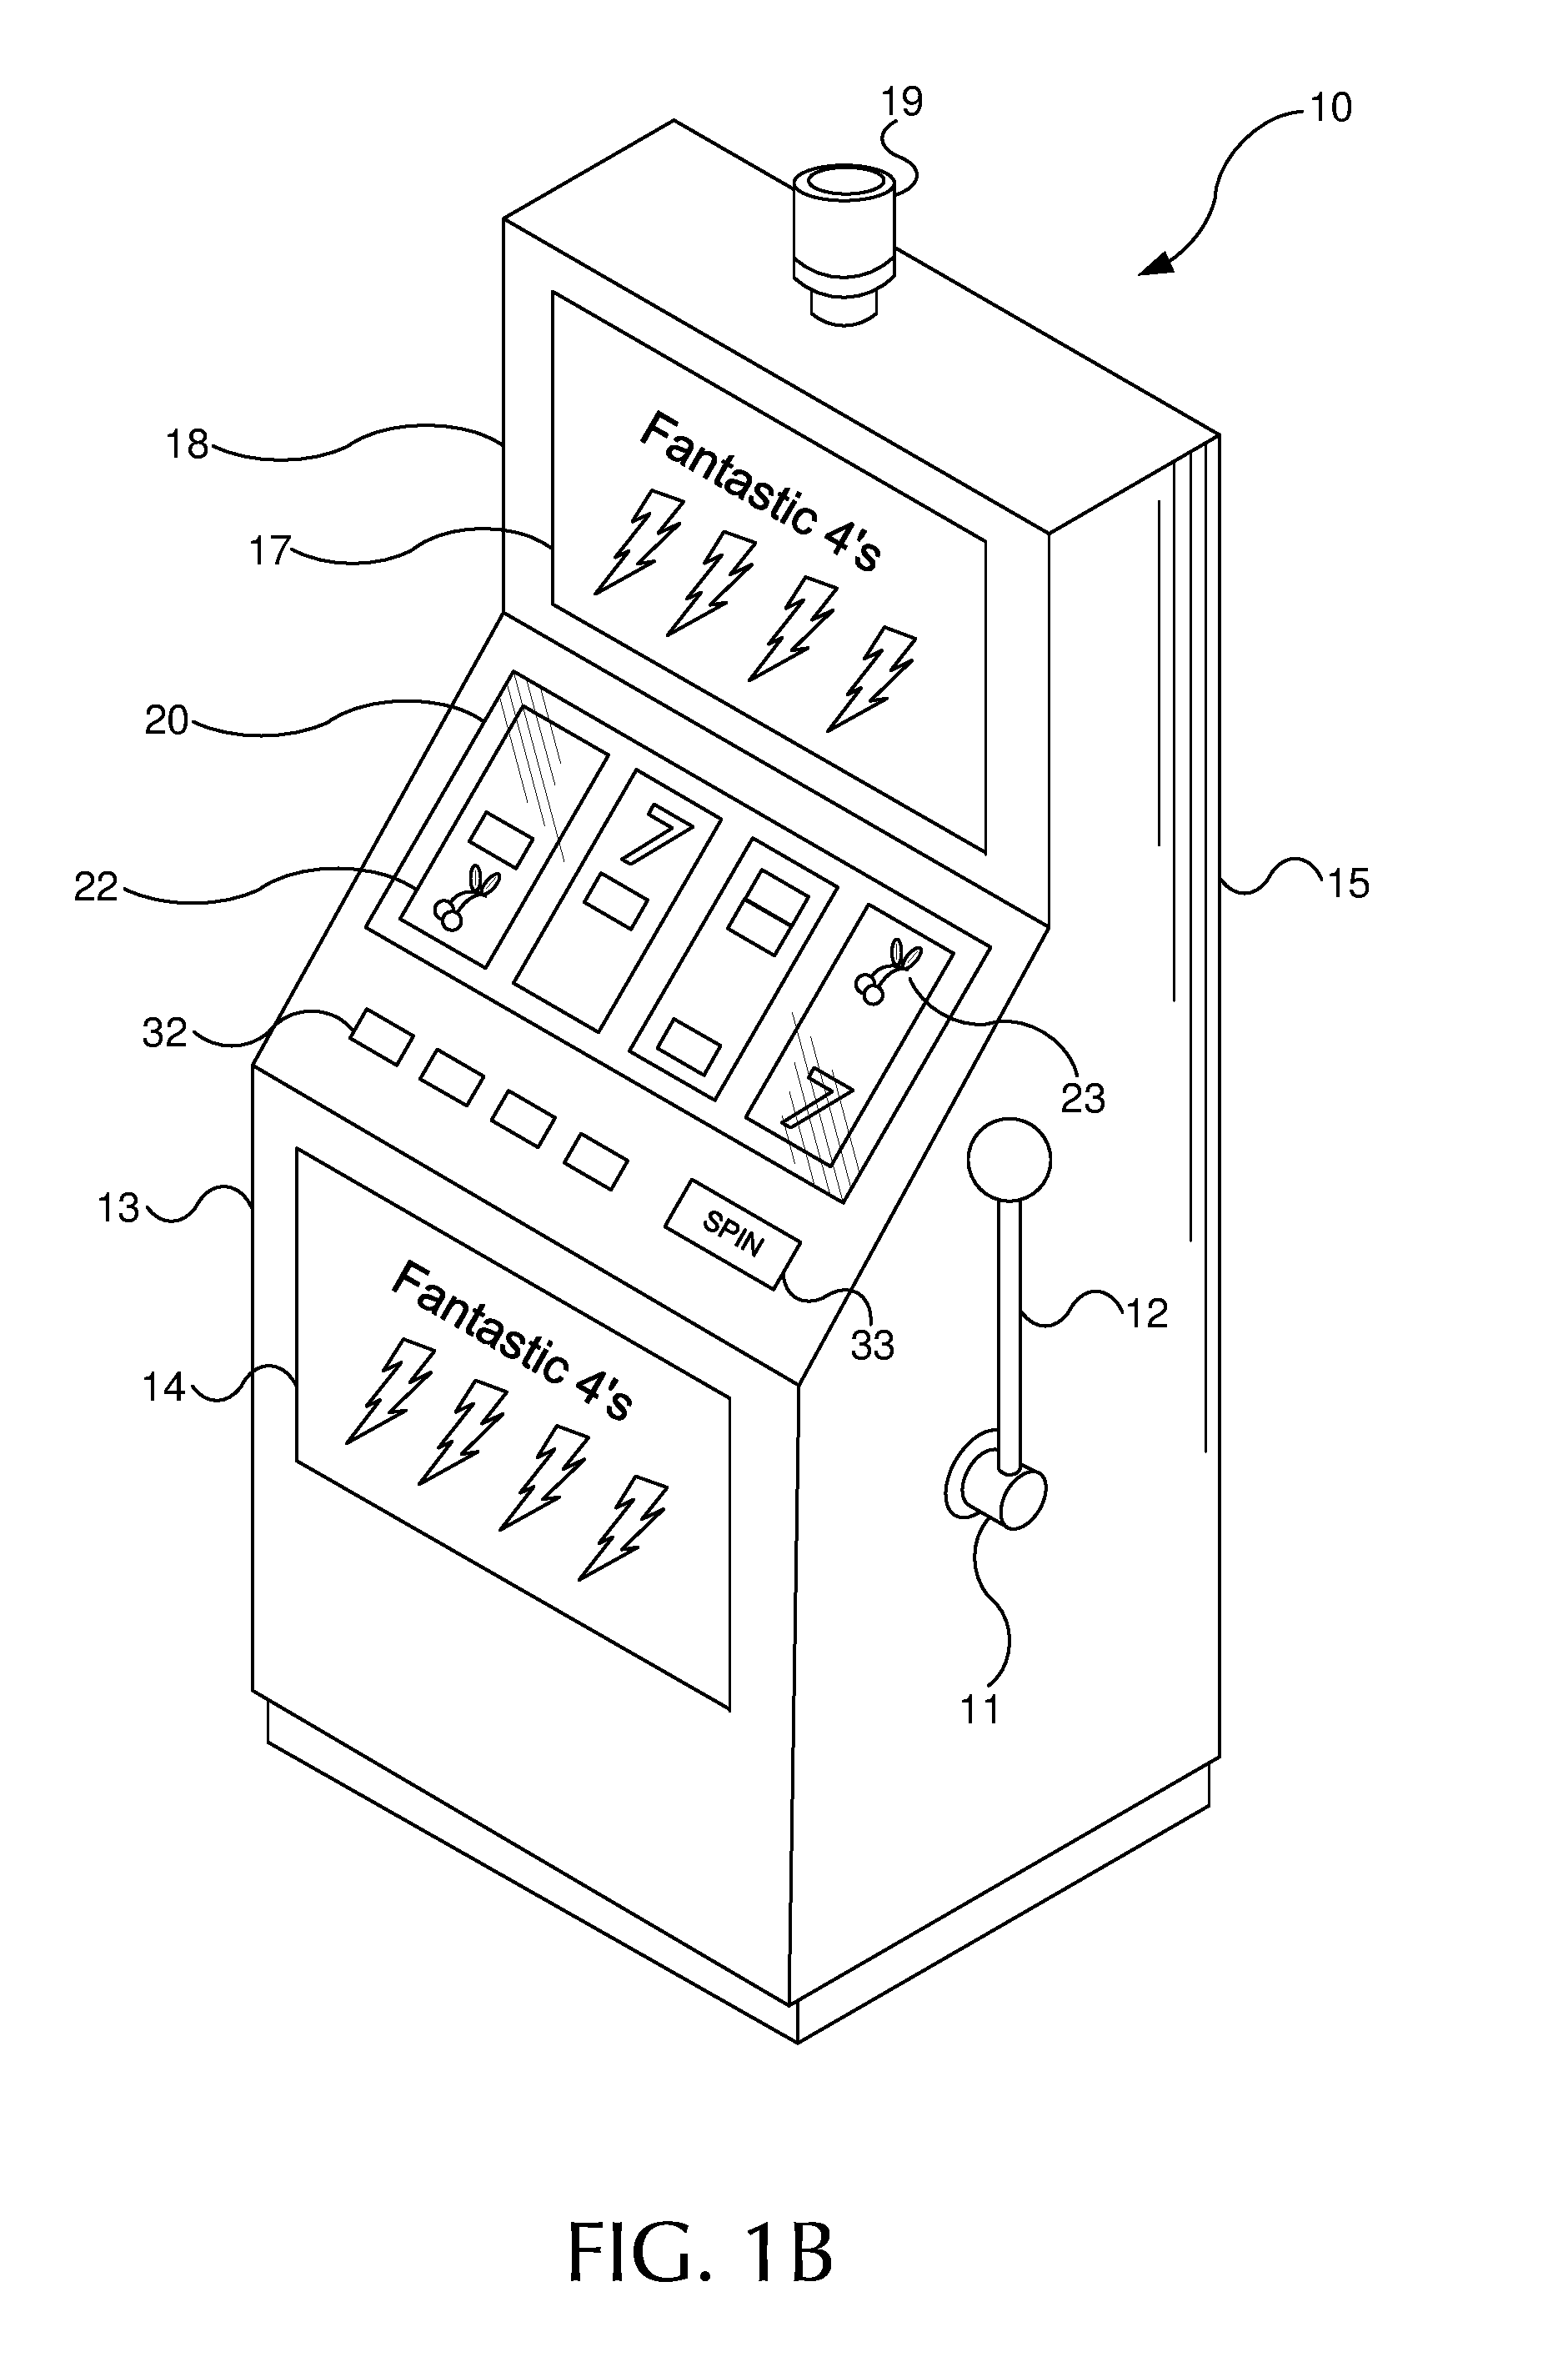 Method for sharing game play on an electronic gaming device